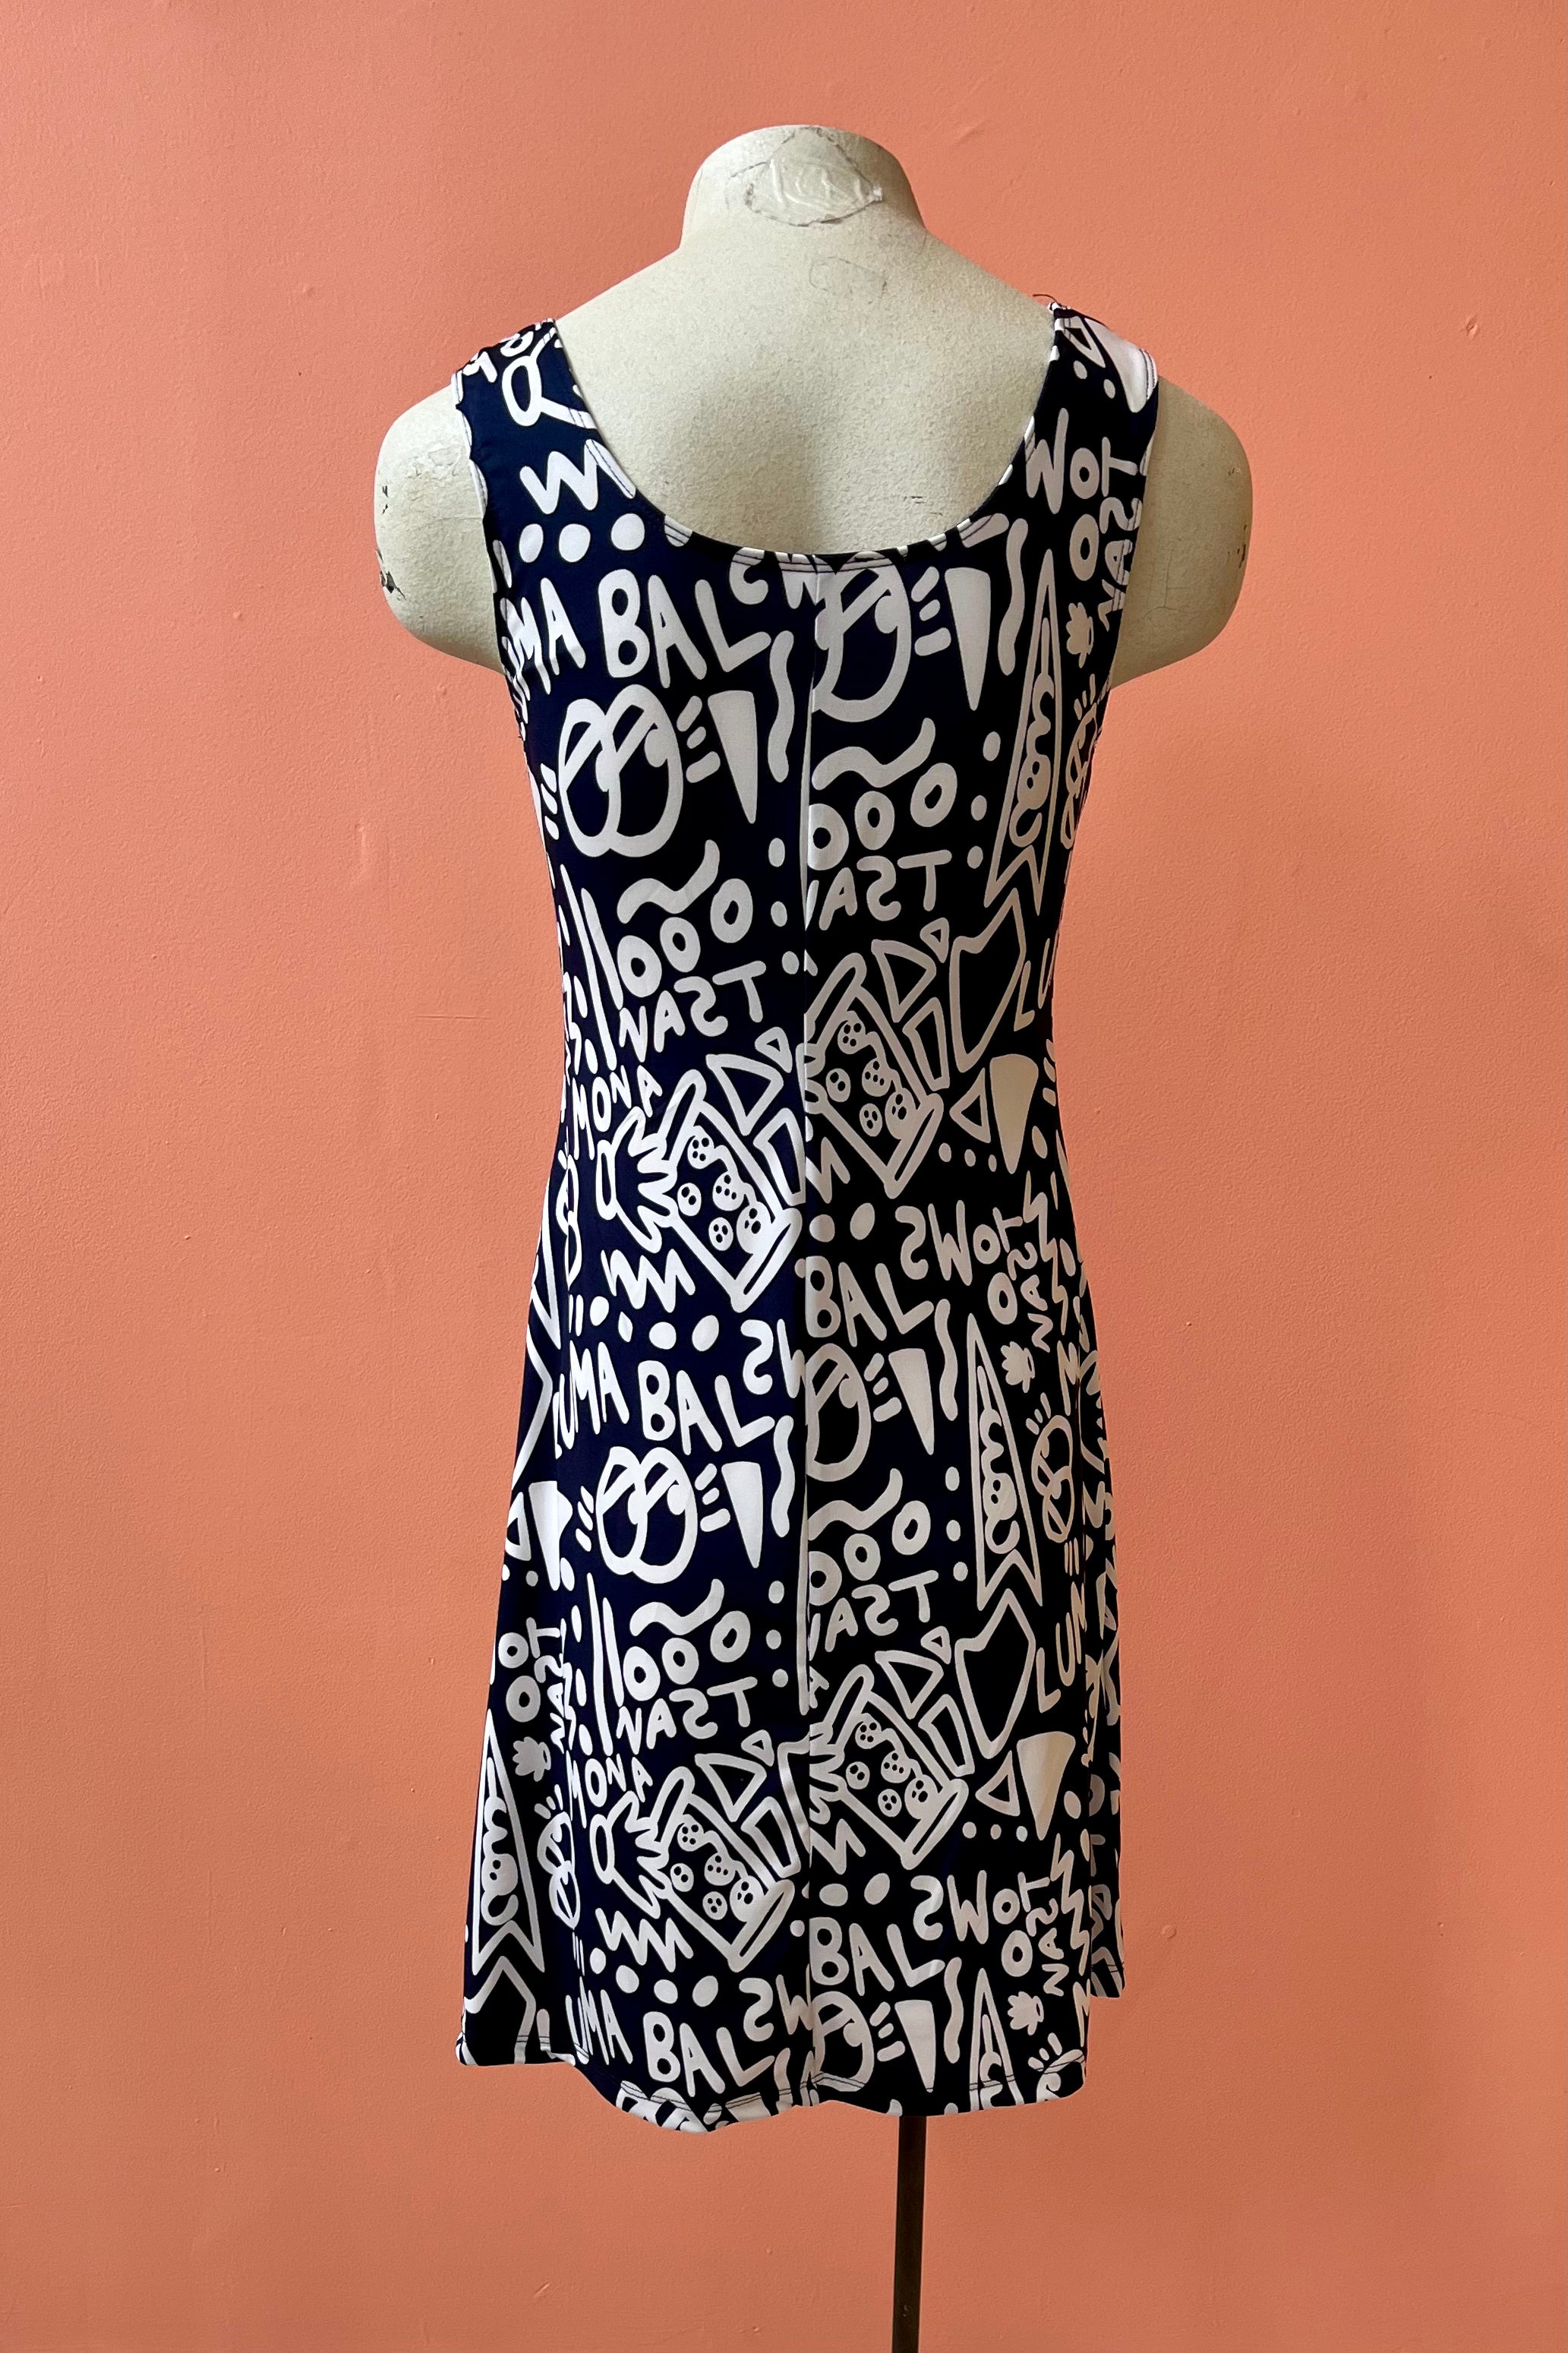 Phillips Dress by Yul Voy, black and white graffiti print, back view, scooped neck front and back, tank dress, wide straps, fit and flare shape, above the knee, sizes XS to XXL, made in Montreal